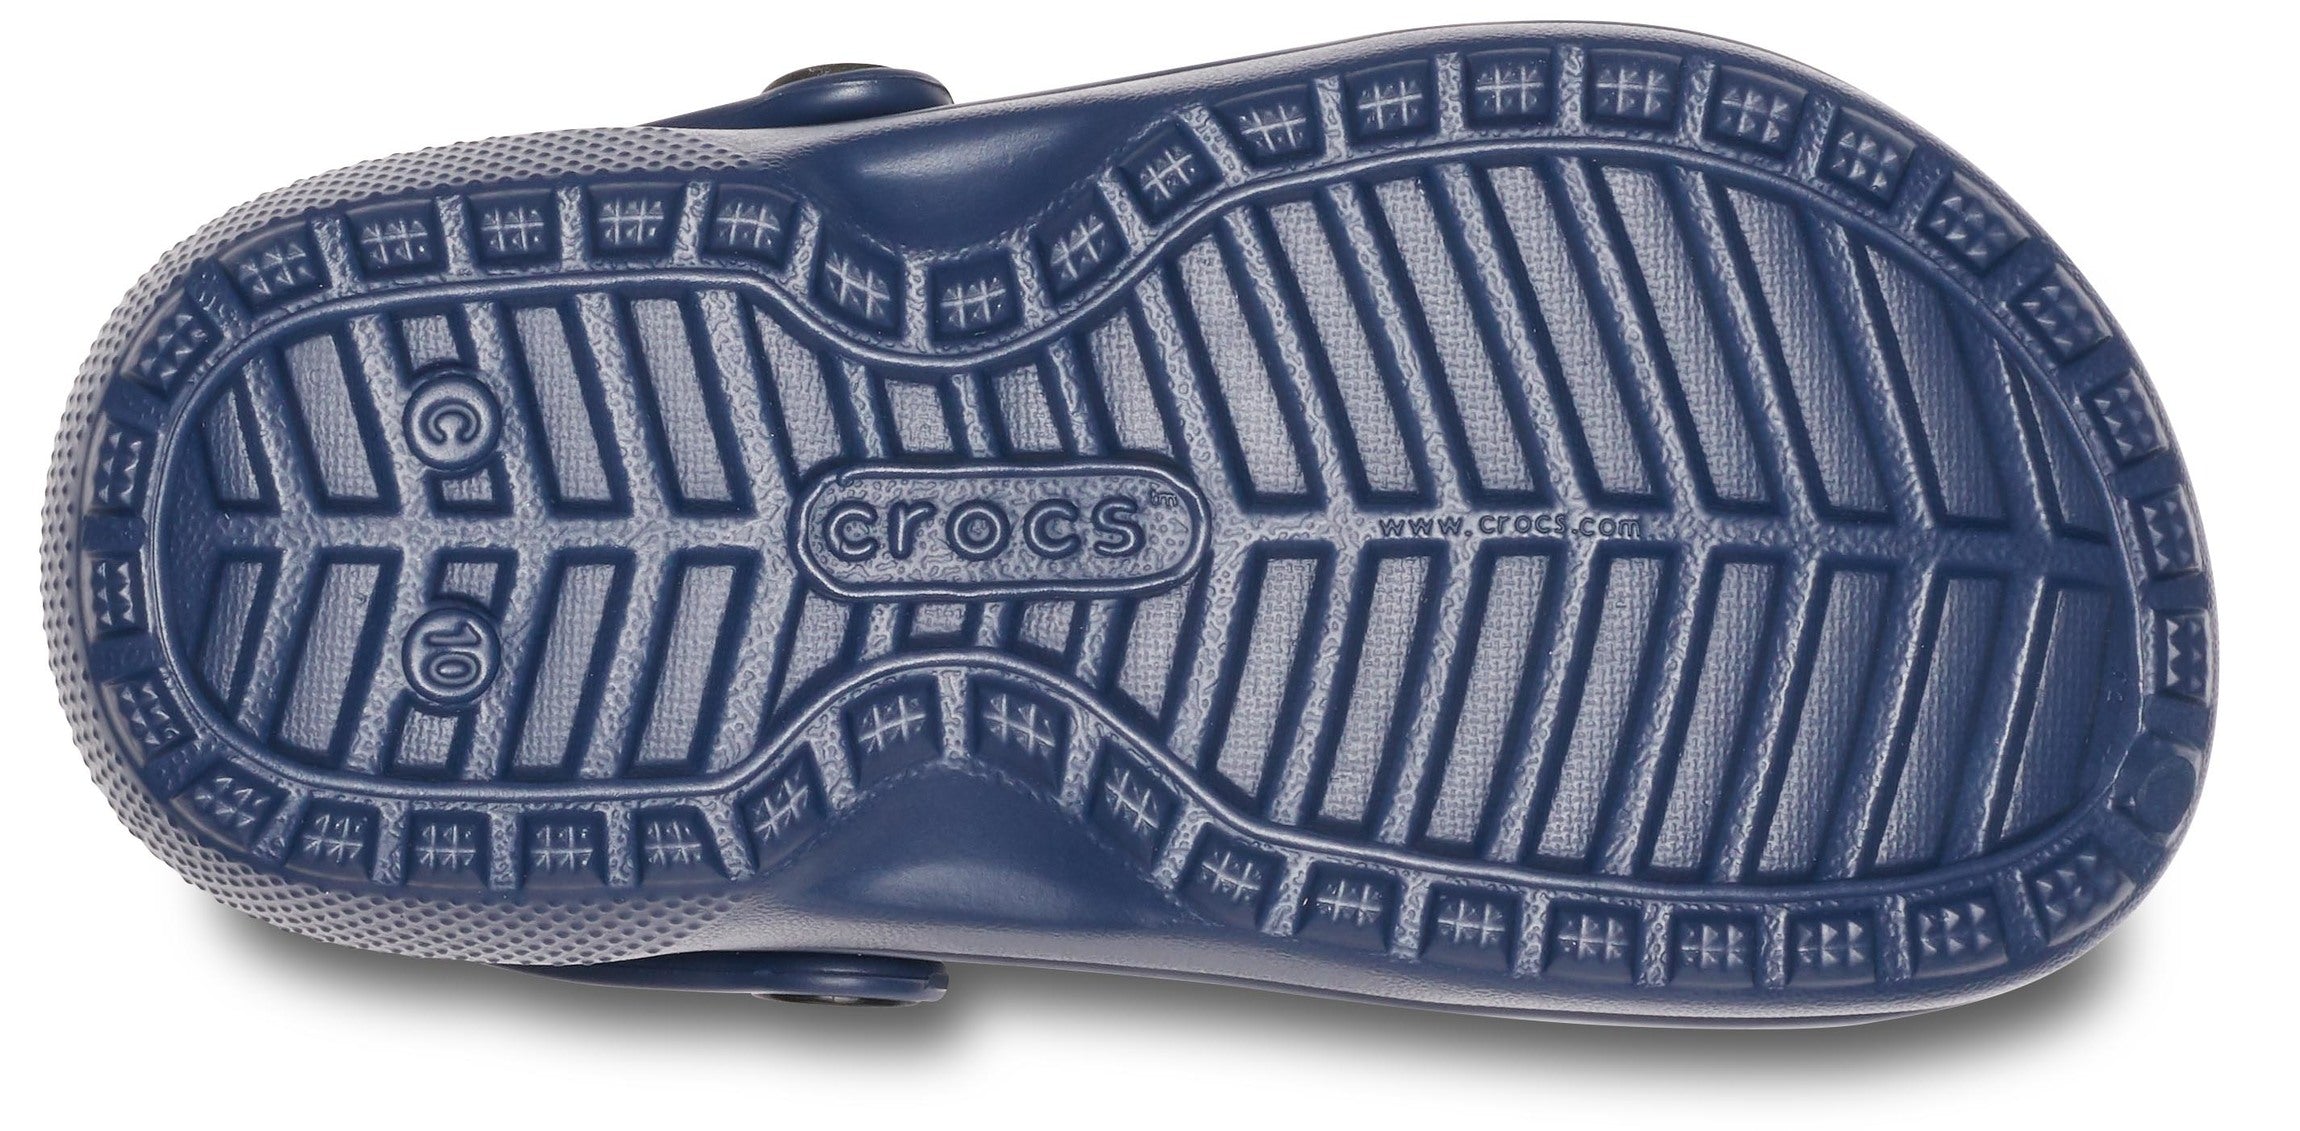 Classic Lined Clog K Navy/Charcoal